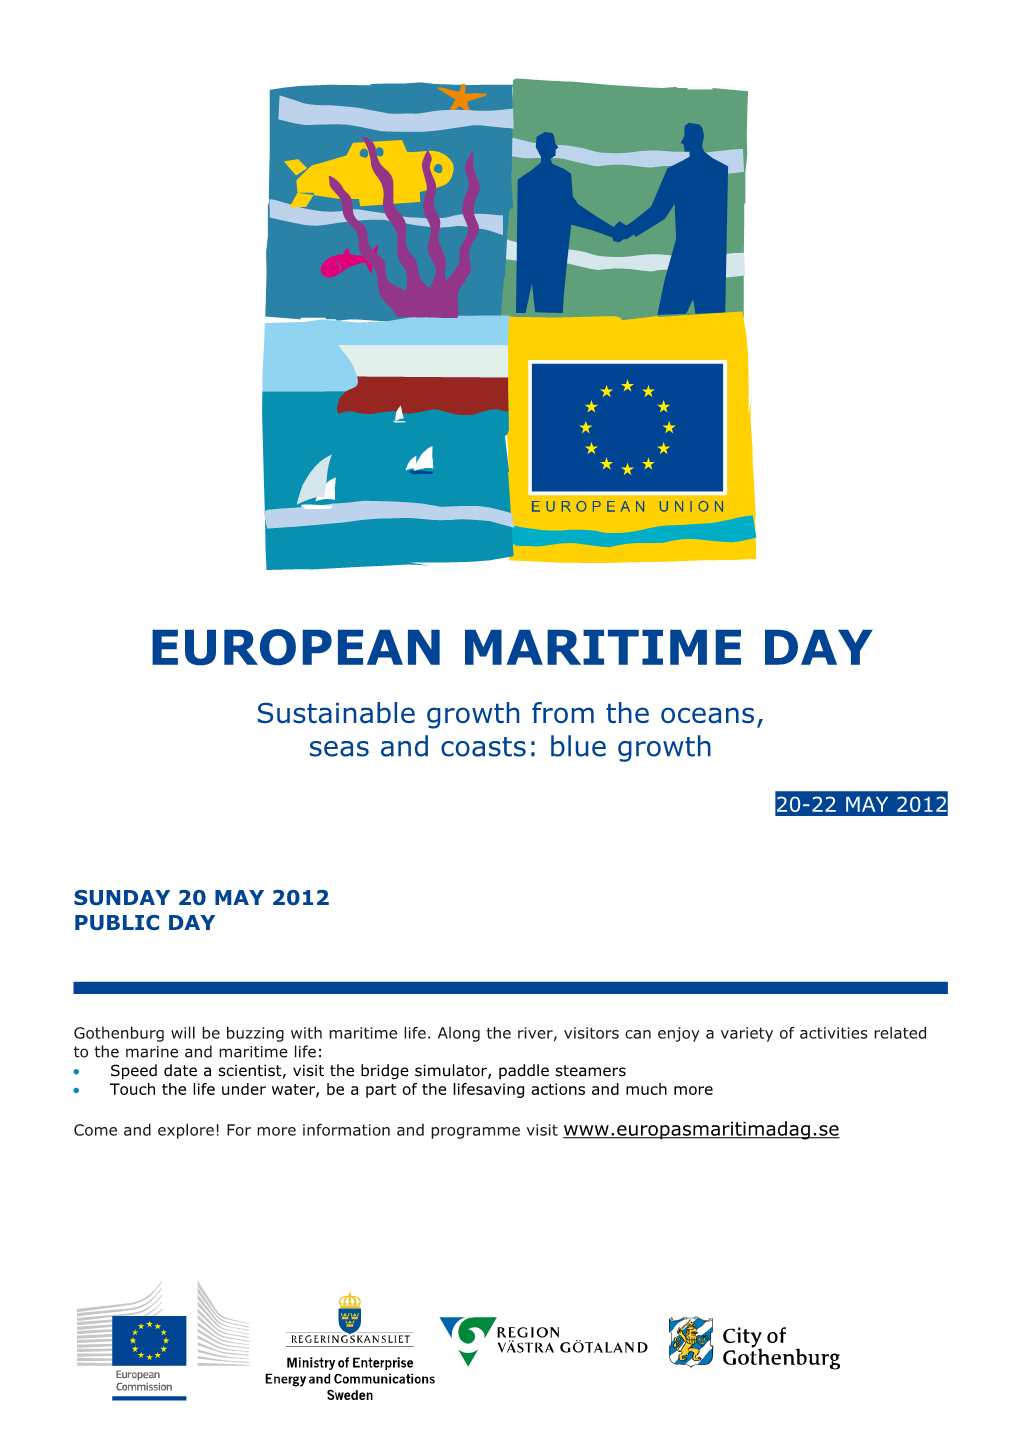 EUROPEAN MARITIME DAY Sustainable Growth from the Oceans, Seas and Coasts: Blue Growth